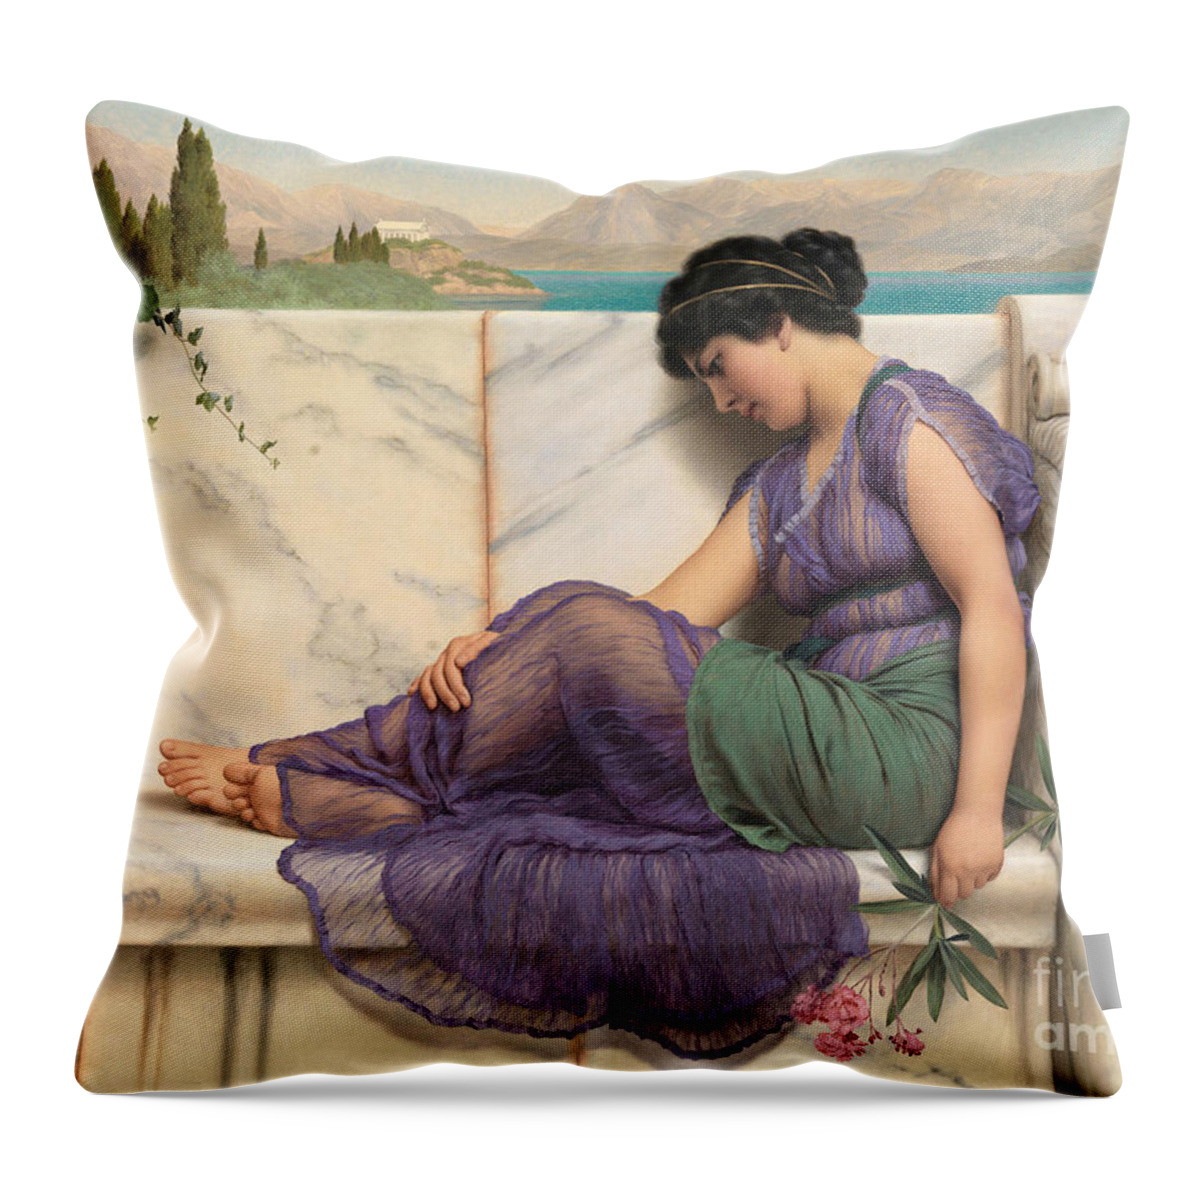 Daydreams 1909 Throw Pillow featuring the photograph Daydreams 1909 by Padre Art